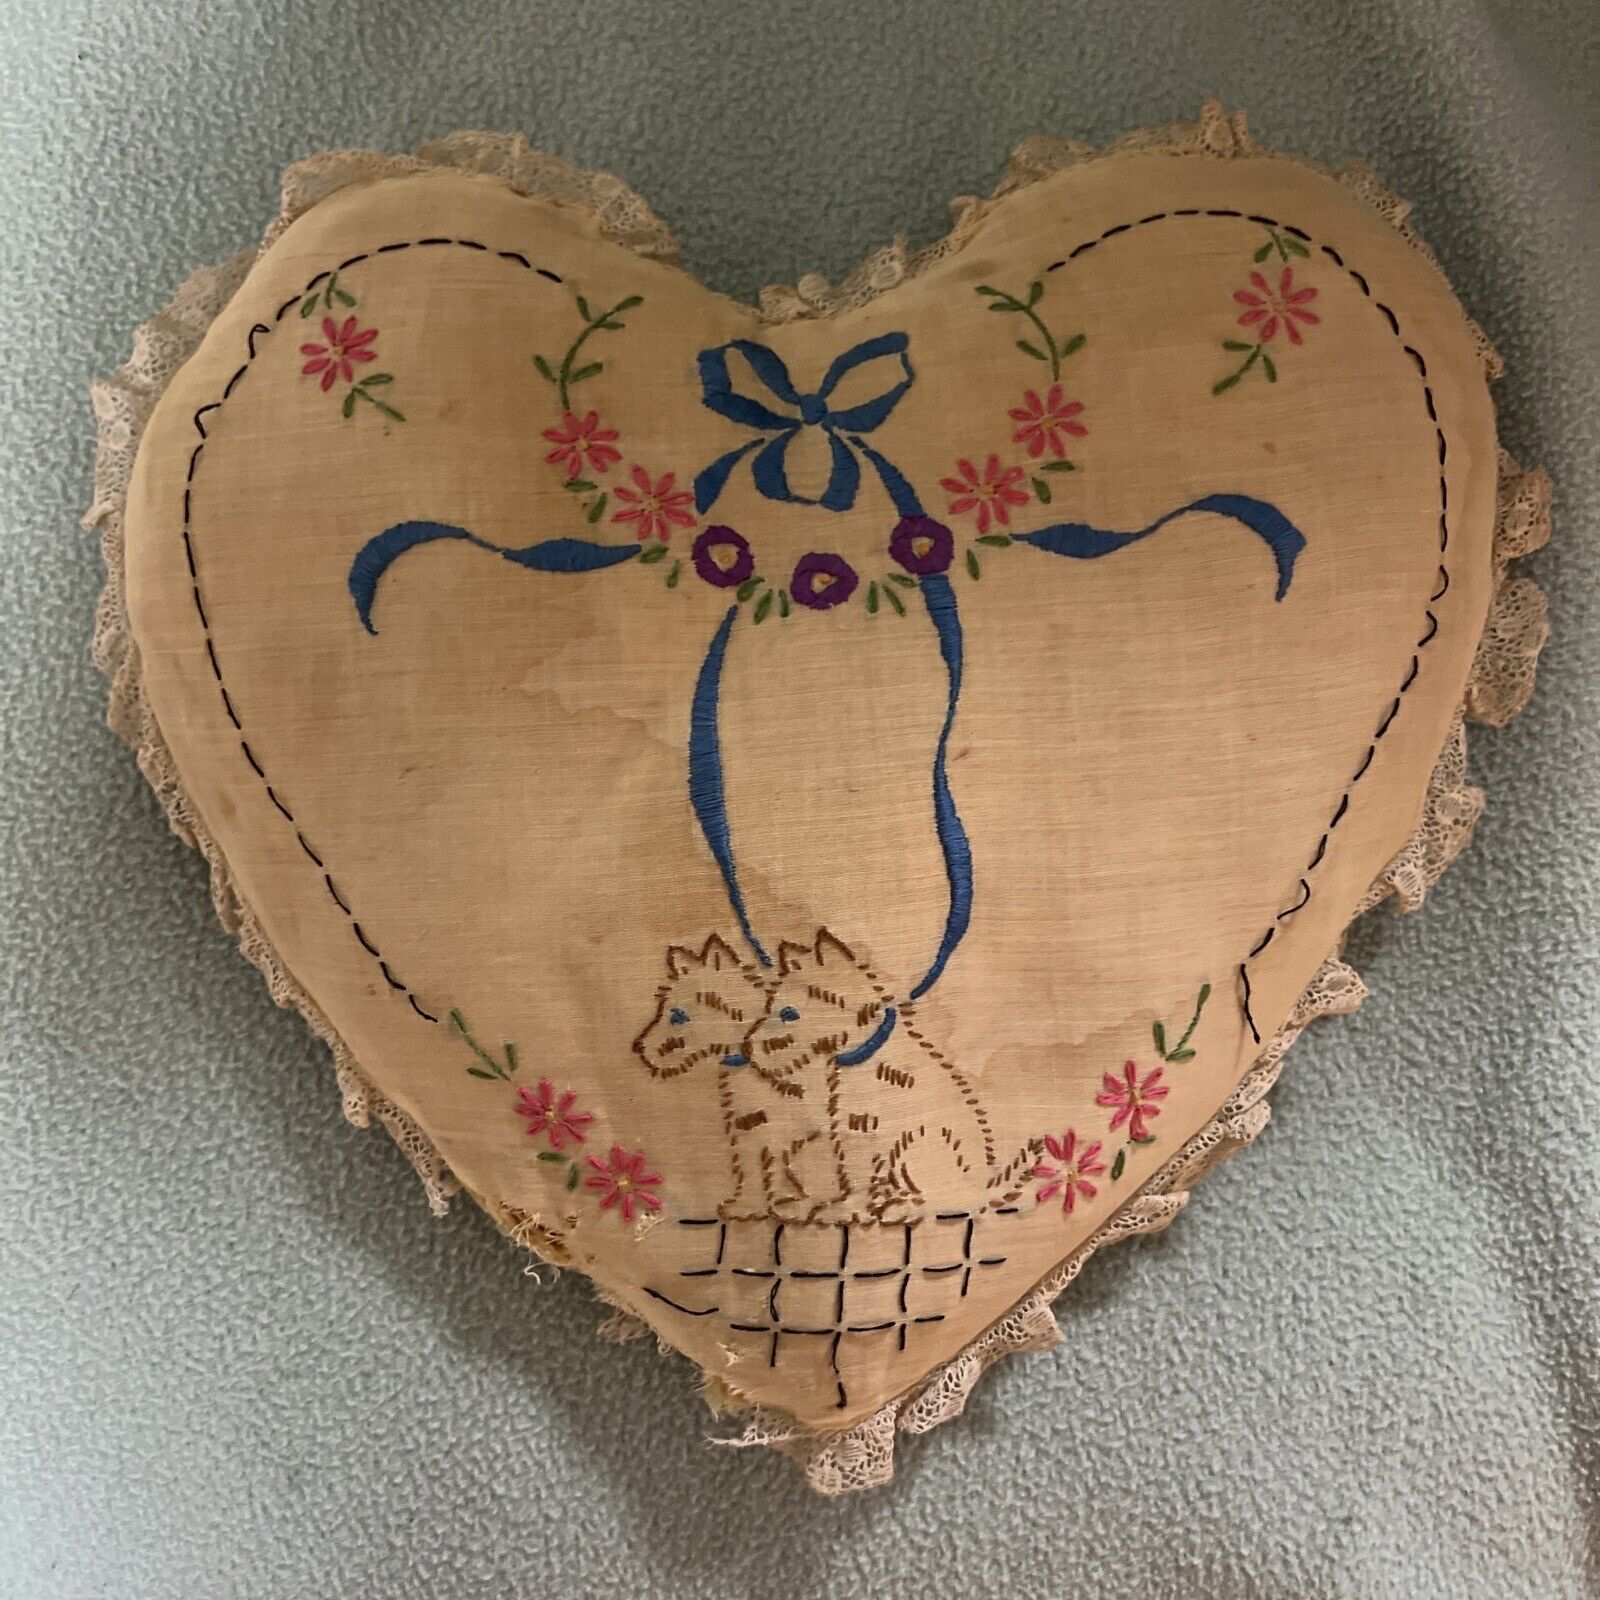 Vintage Heart Pillow With Embroidery Flowers, Blue Ribbon And Scotty Dogs